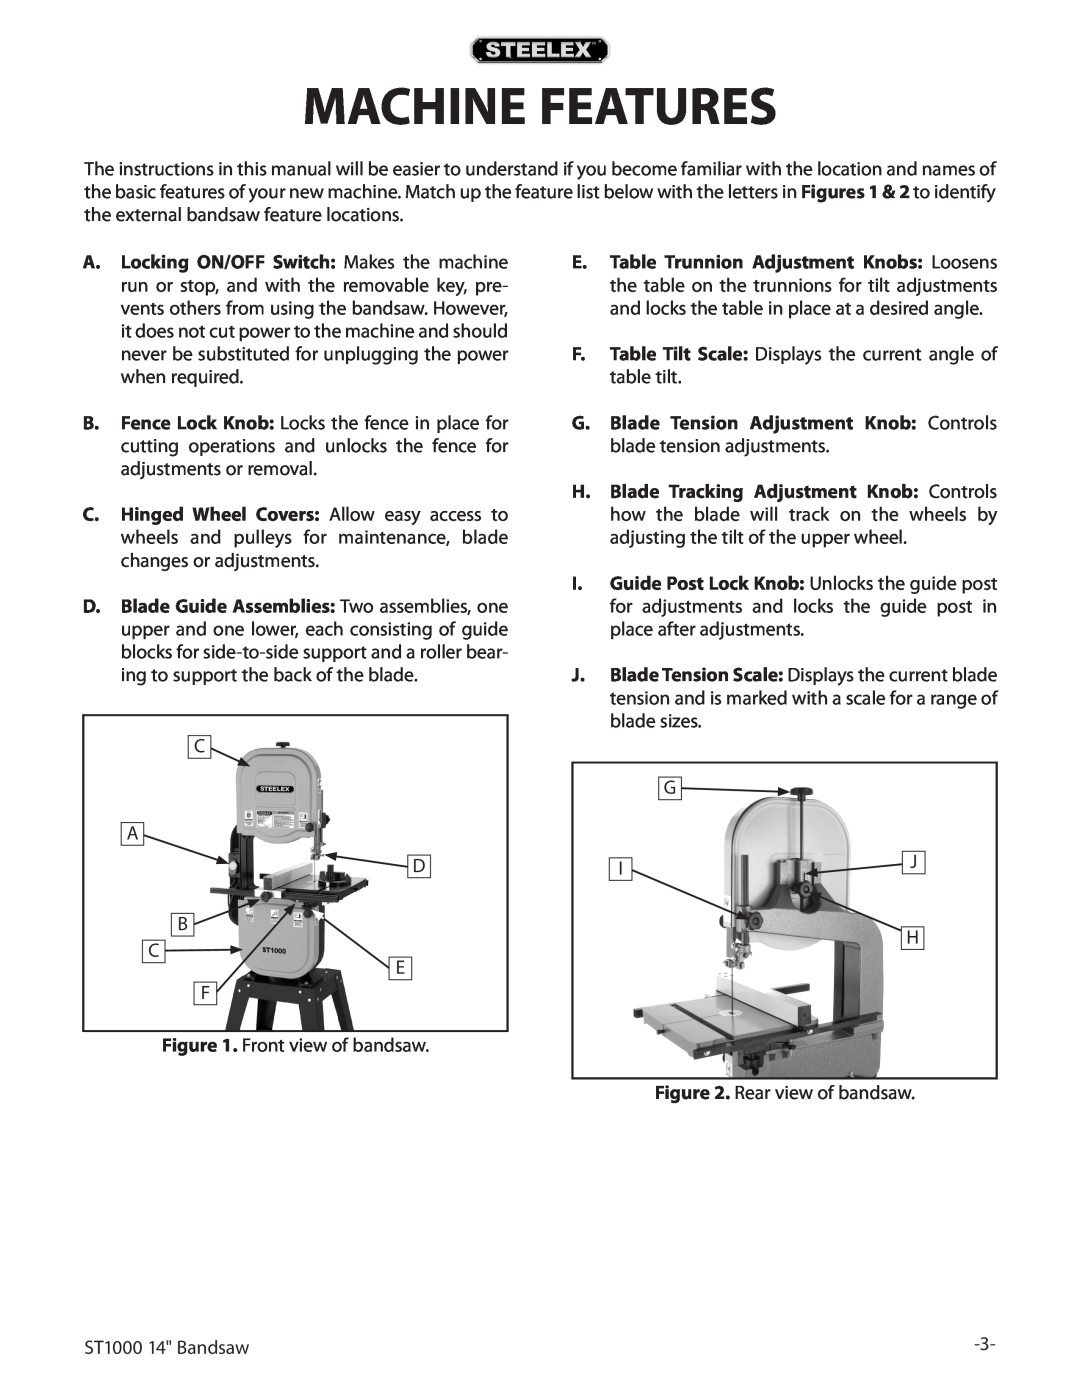 Woodstock ST1000 owner manual Machine Features 